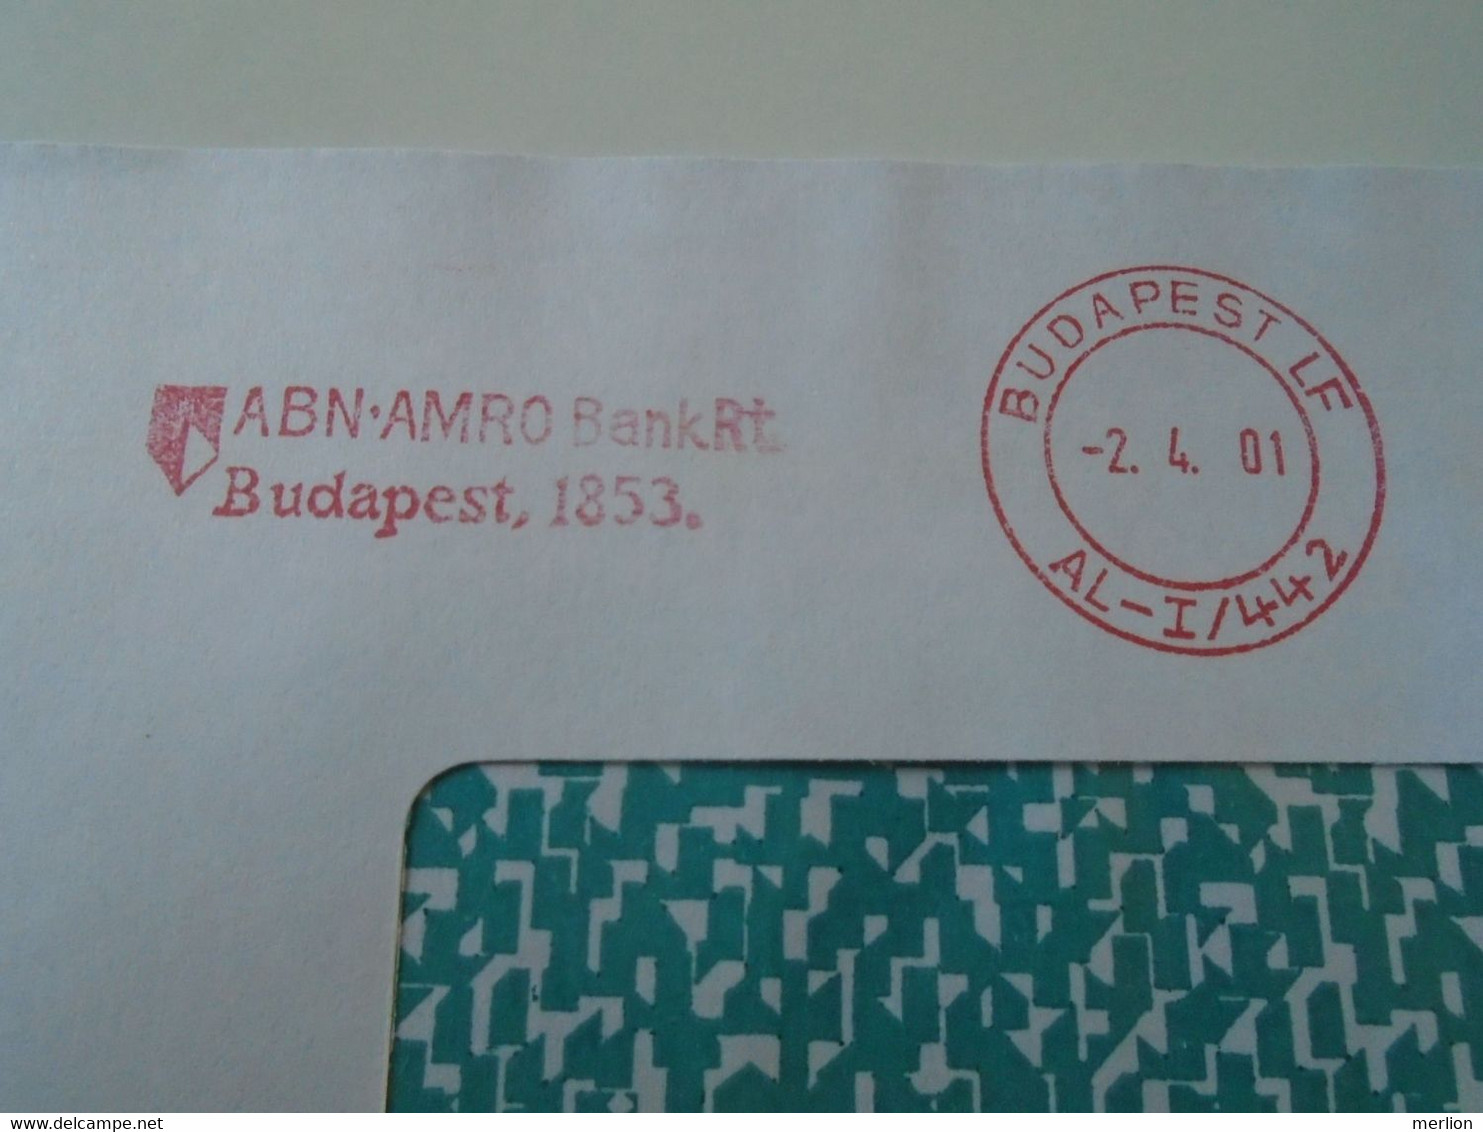 AD00012.118  Hungary Cover  -EMA Red Meter Freistempel-   2001   Budapest  ABN AMRO  Bank - Automatenmarken [ATM]